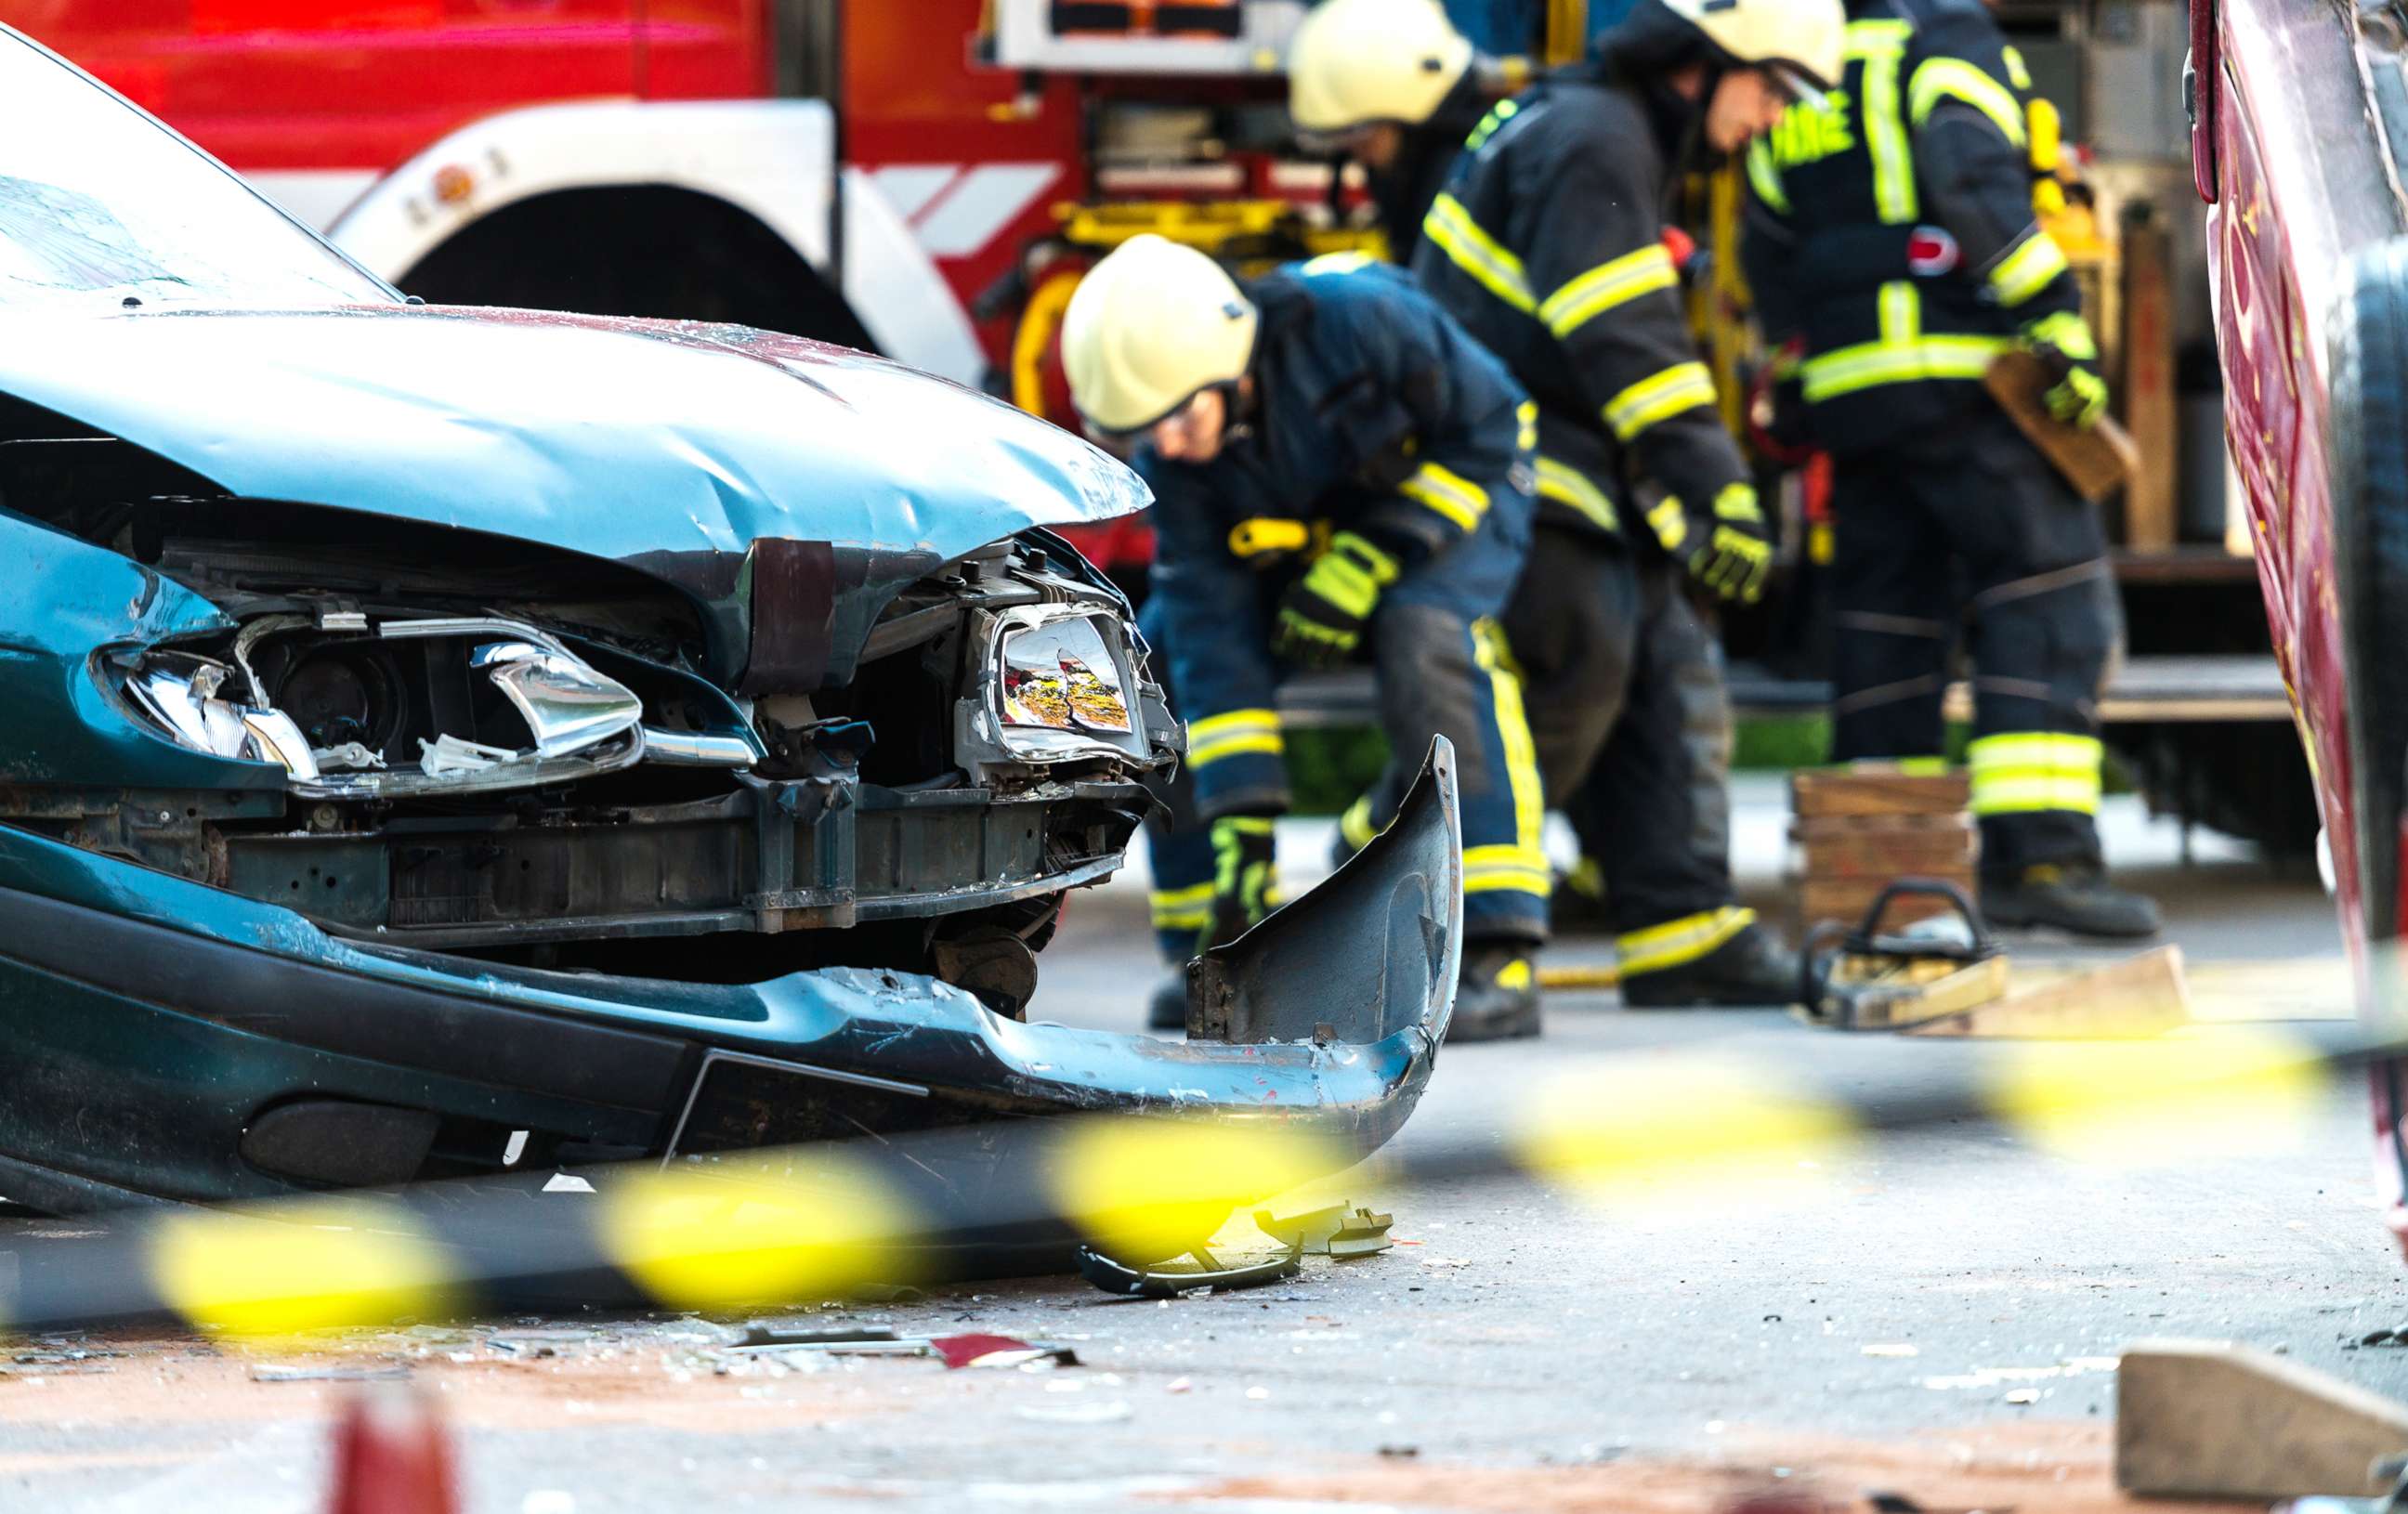 PHOTO: Firefighters attend to a car accident scene in this undated stock photo.